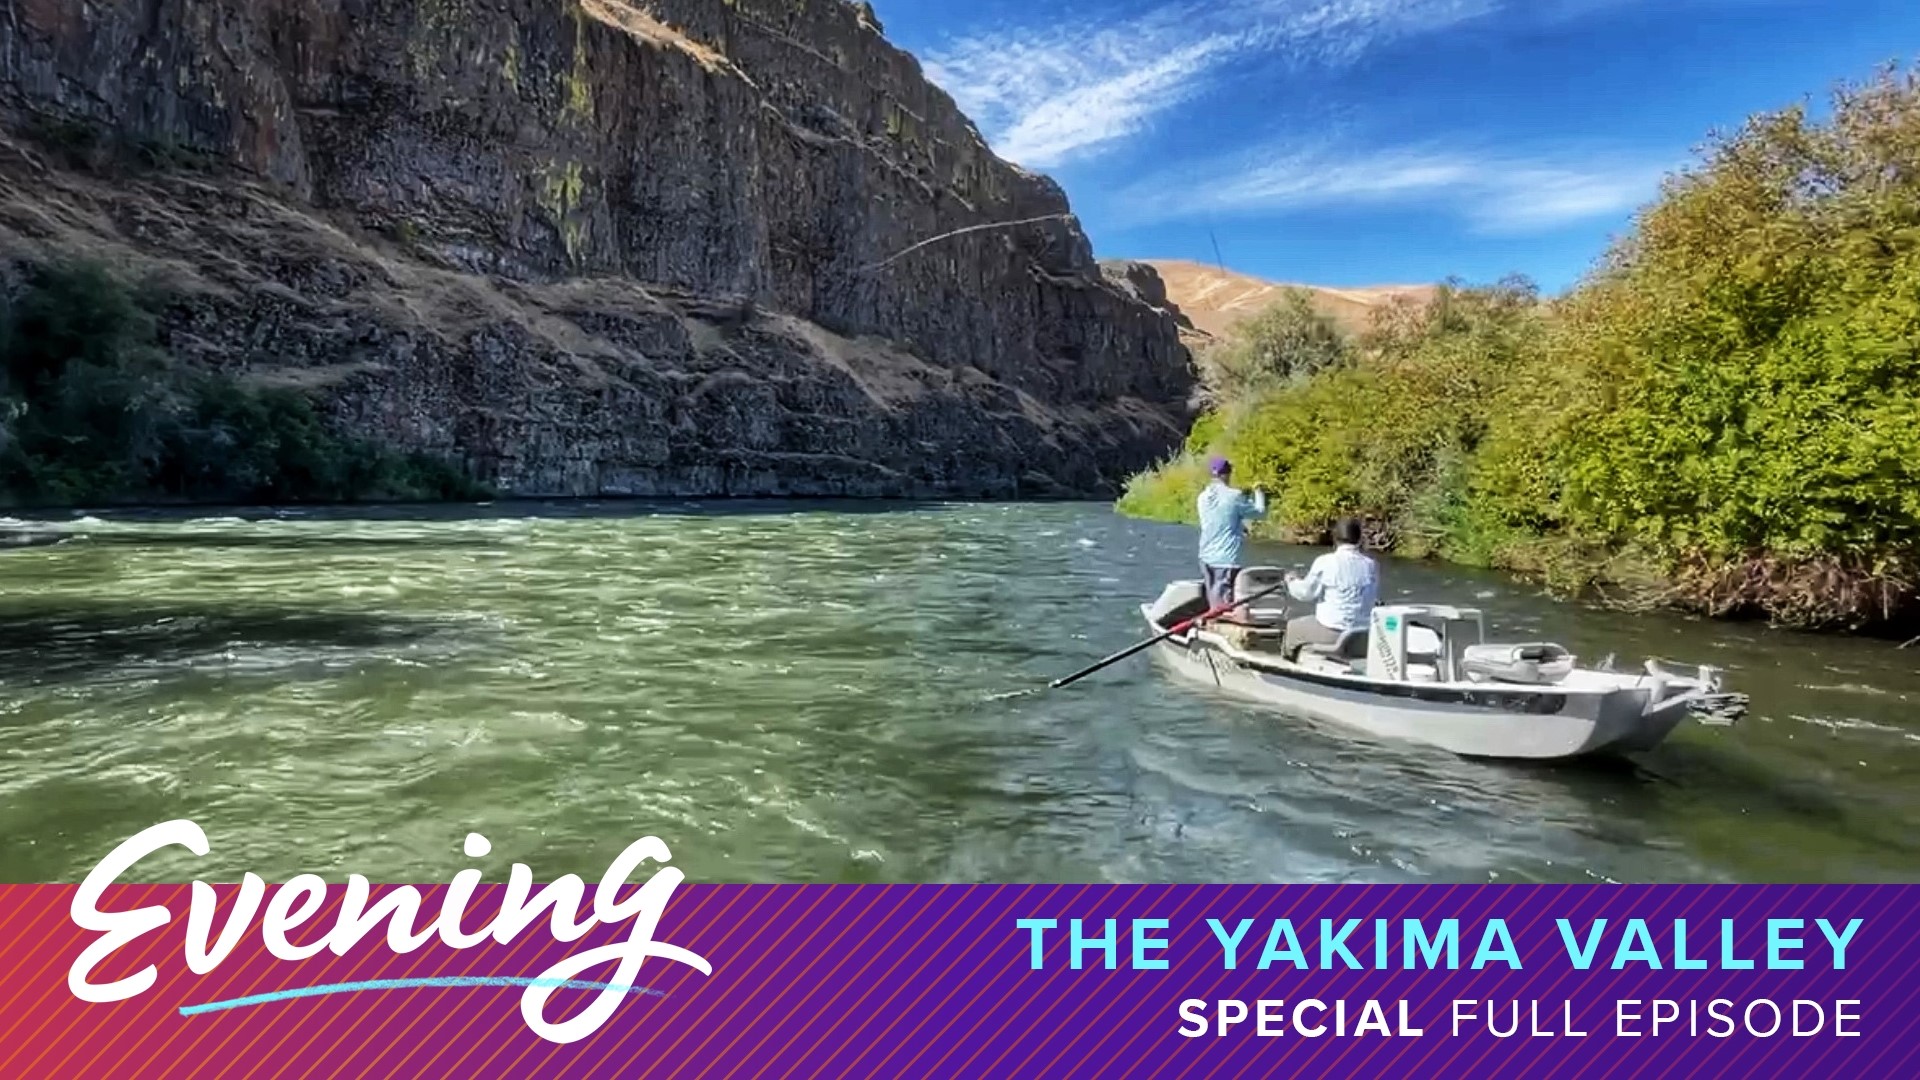 Food, fishing, and fun – the Yakima Valley has got it going on! Sponsored by Yakima Valley Tourism (Originally aired 9/16/2022)